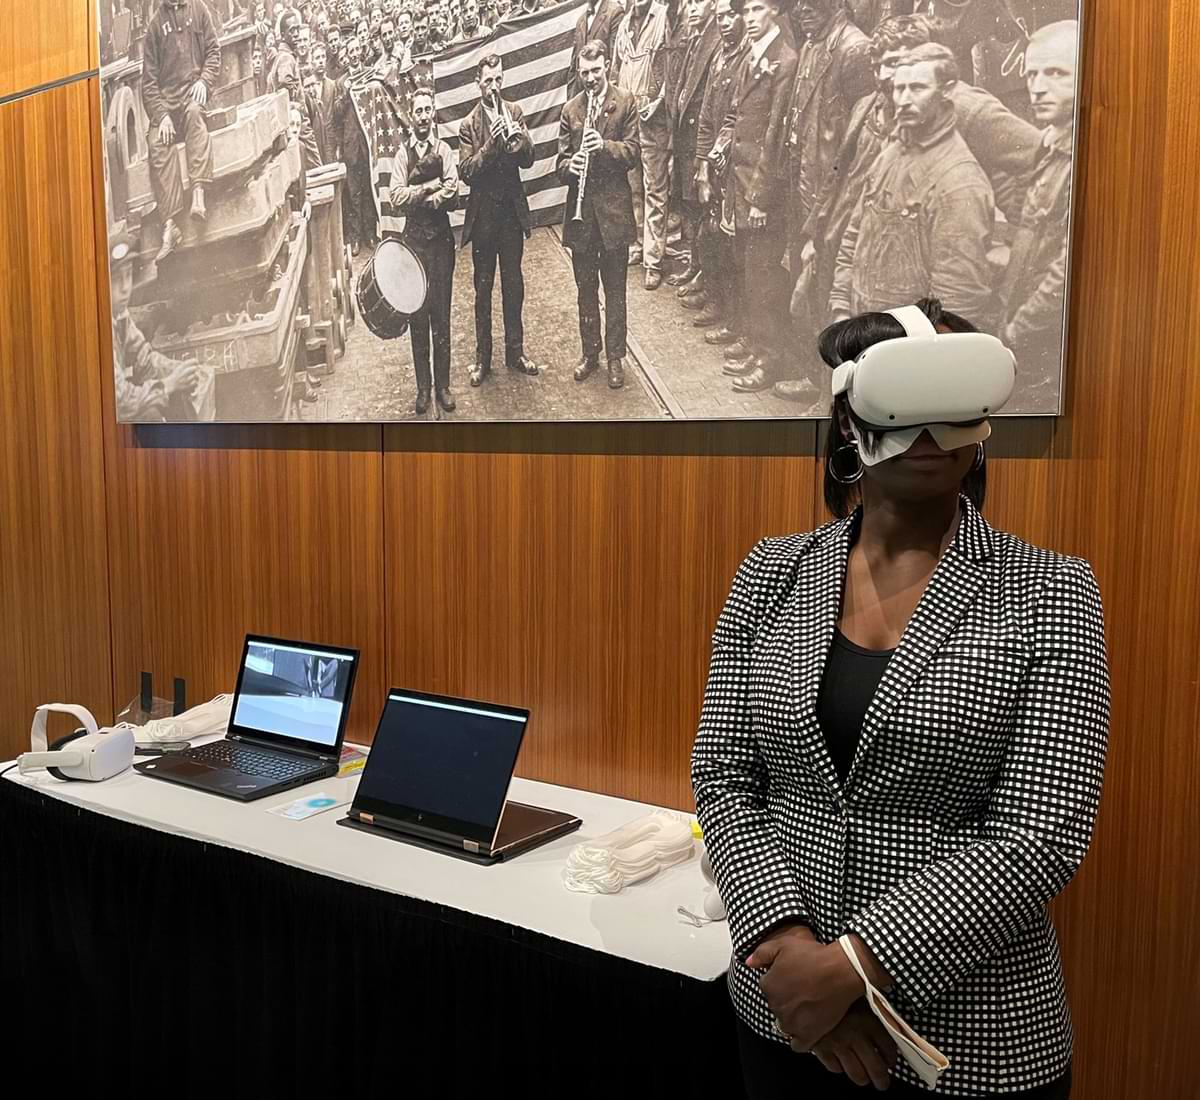 Professor wearing VR headset to demonstrate an immersive experience with large photograph of marchers in background